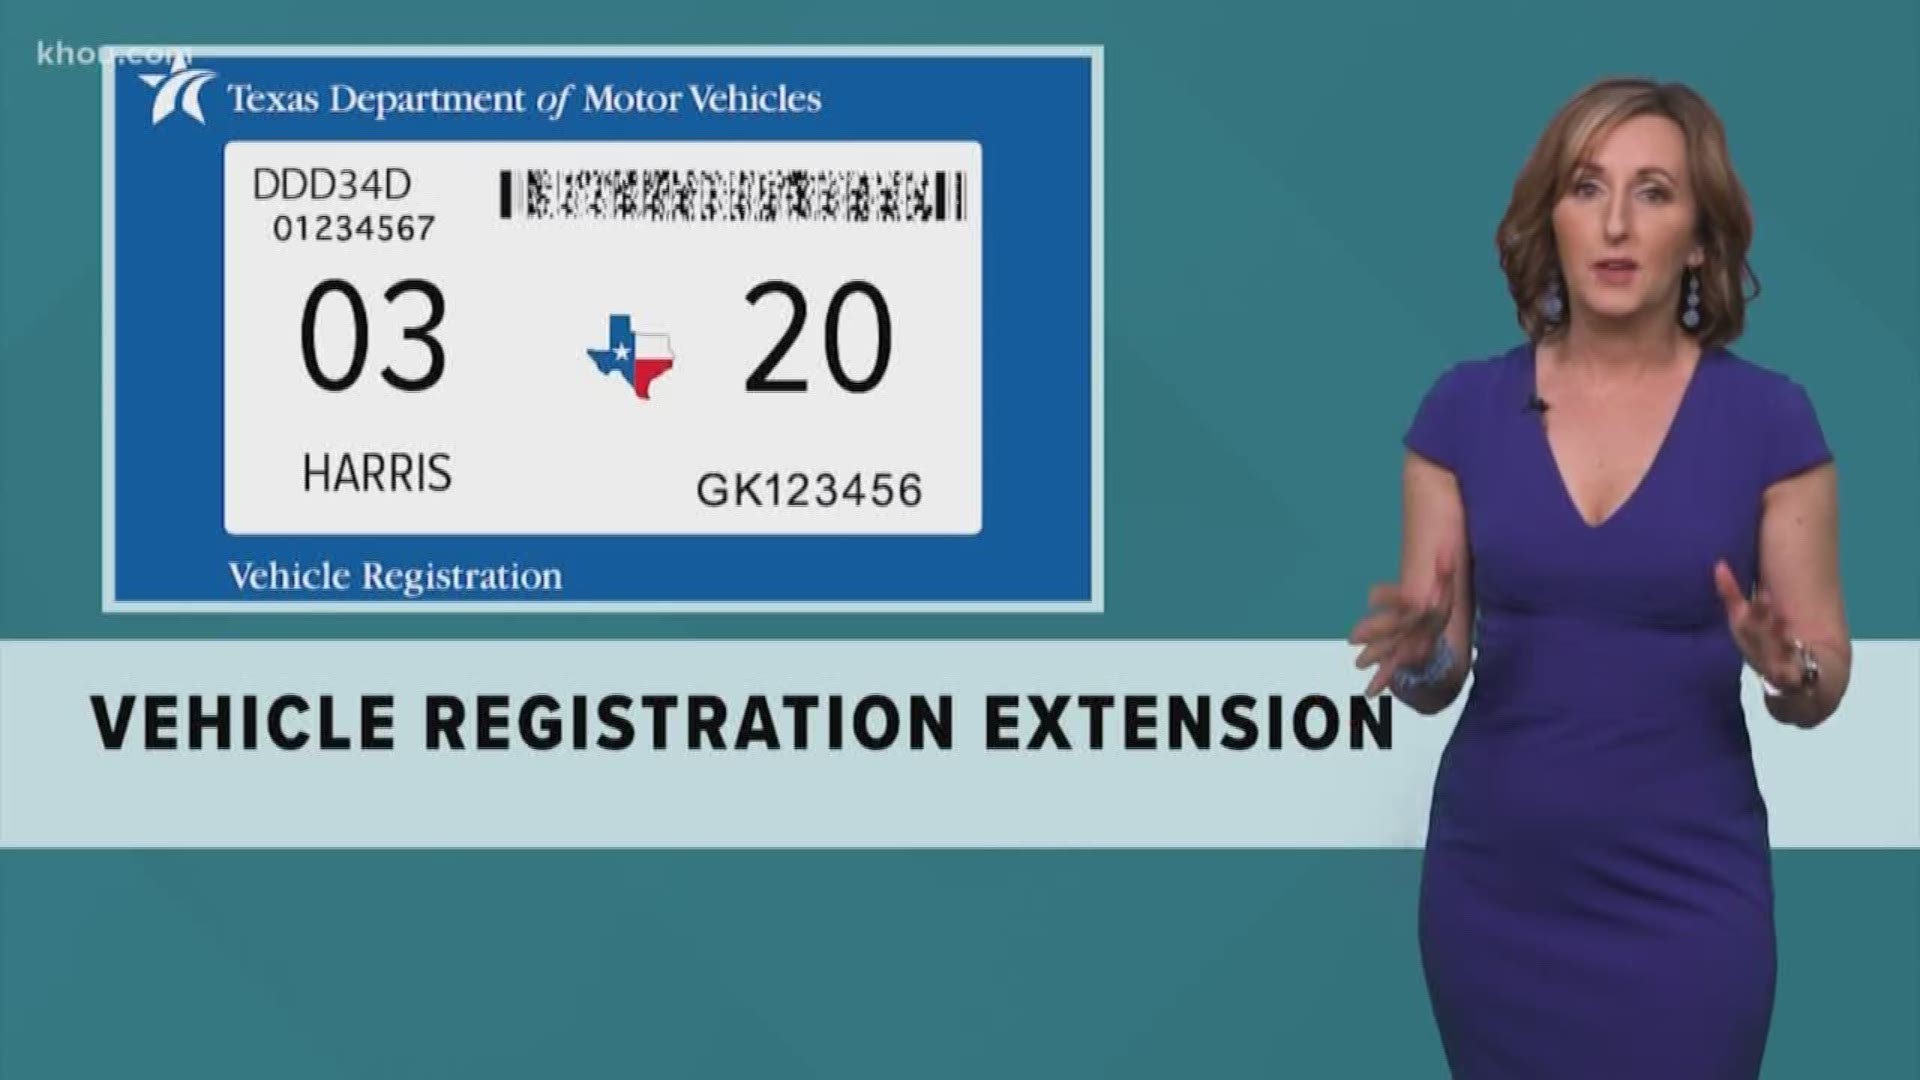 Texas has waived certain rules relating to vehicle registration, parking placards for those with disabilities and titling to protect Texans from the coronavirus.